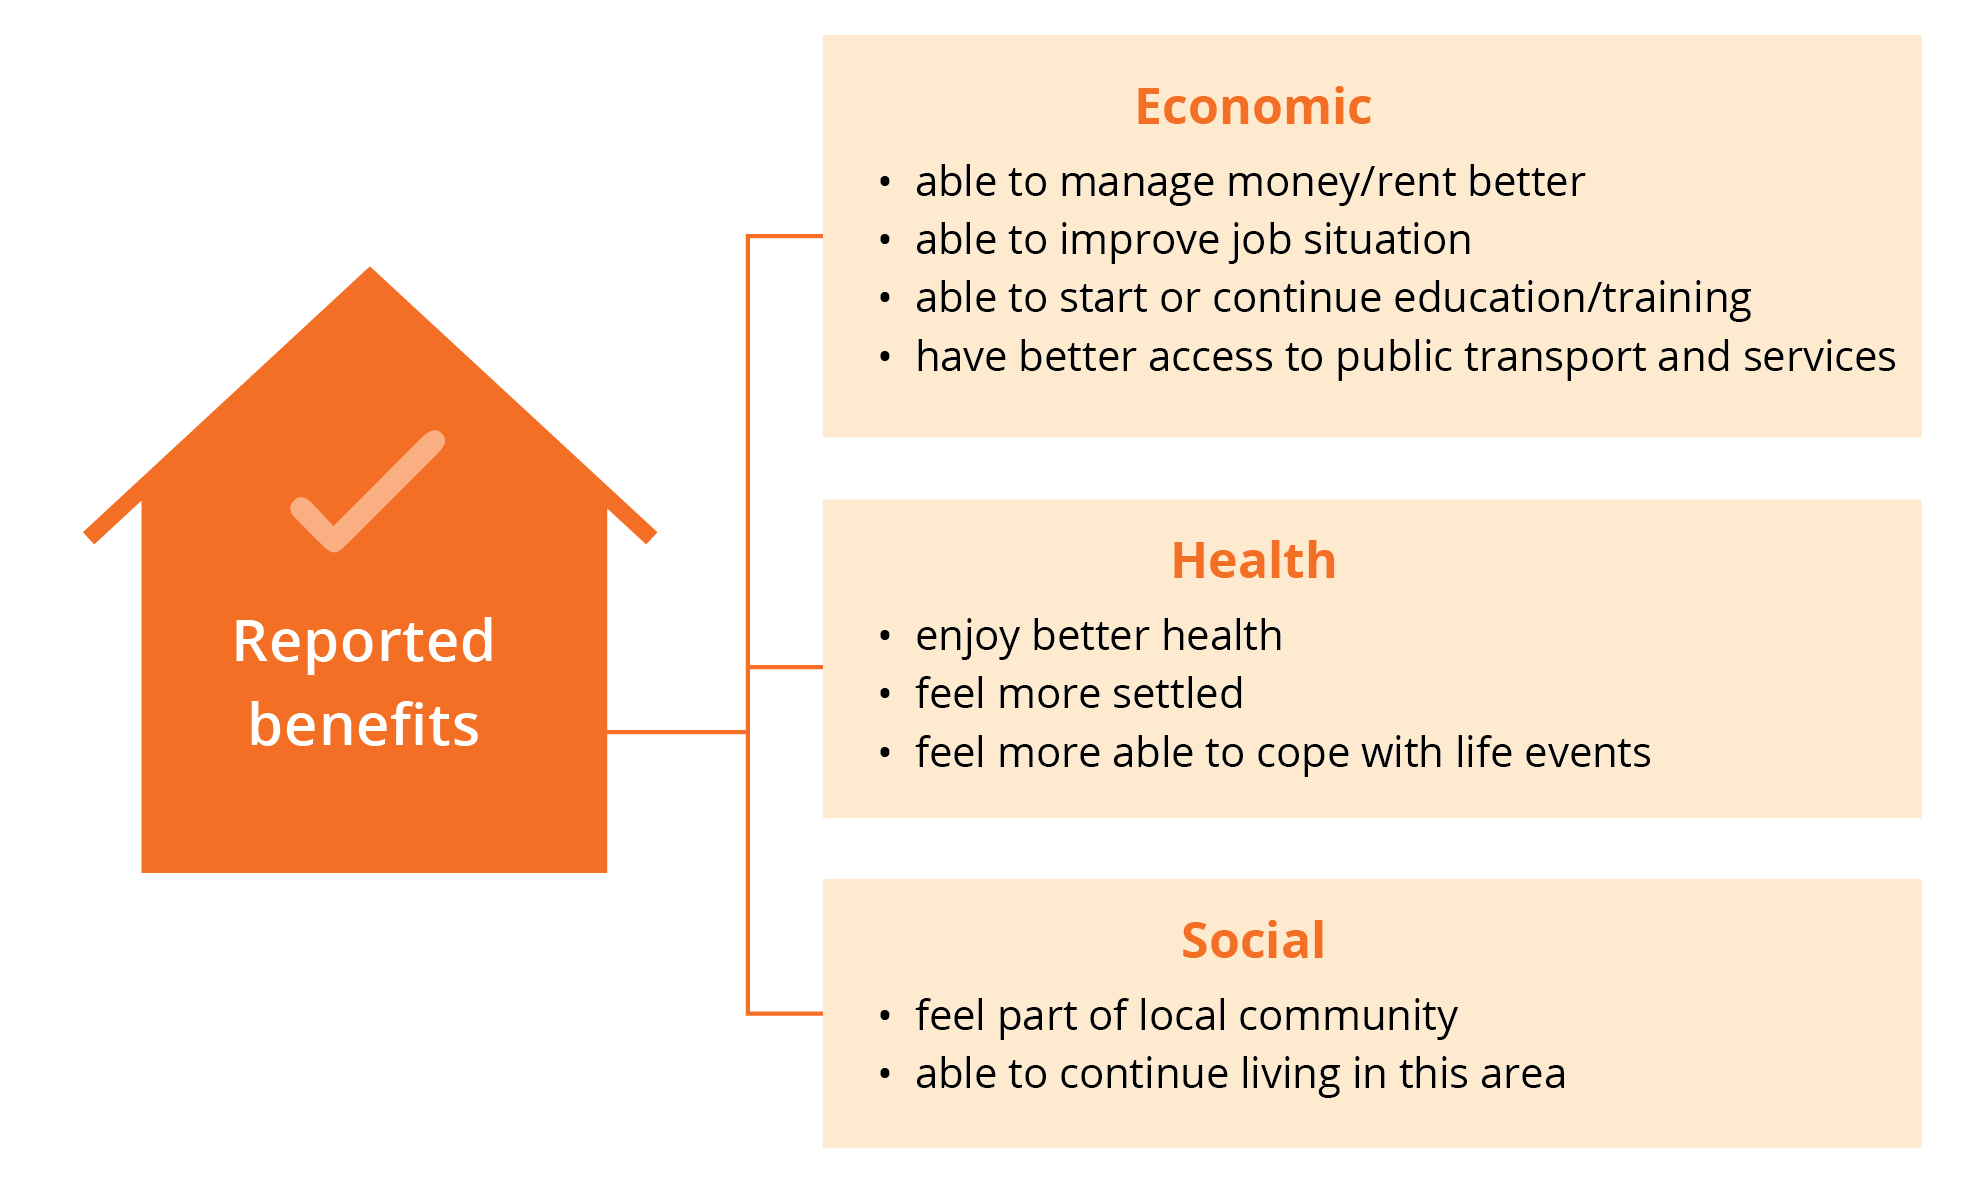 Image shows the benefits listed under each of the following life domains: economic, health and social.